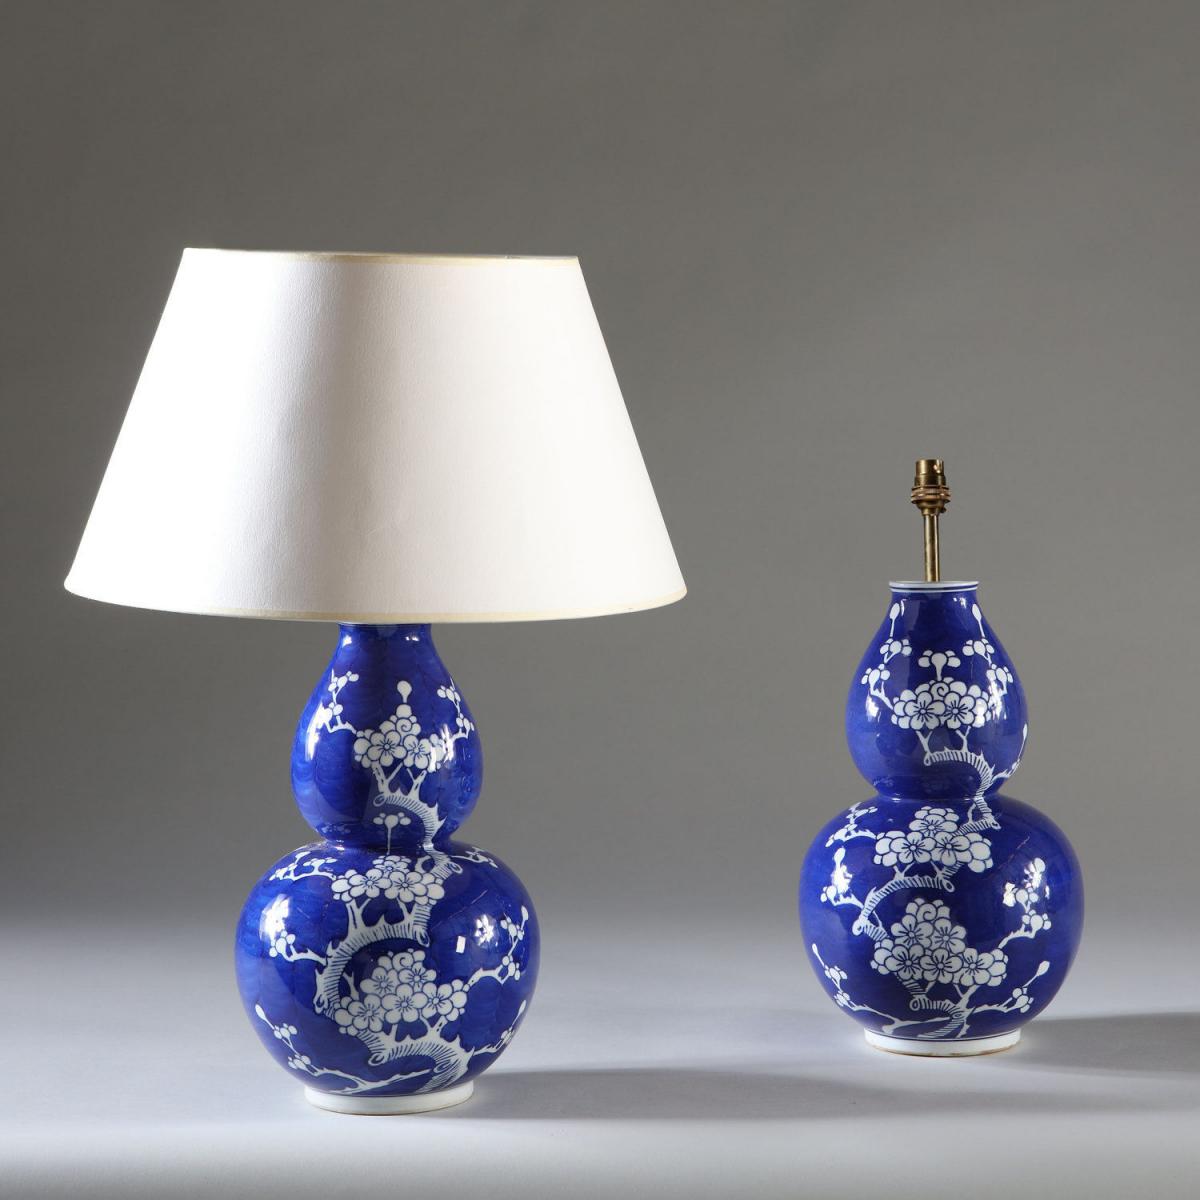 A Pair of Double Gourd Chinese Lamps